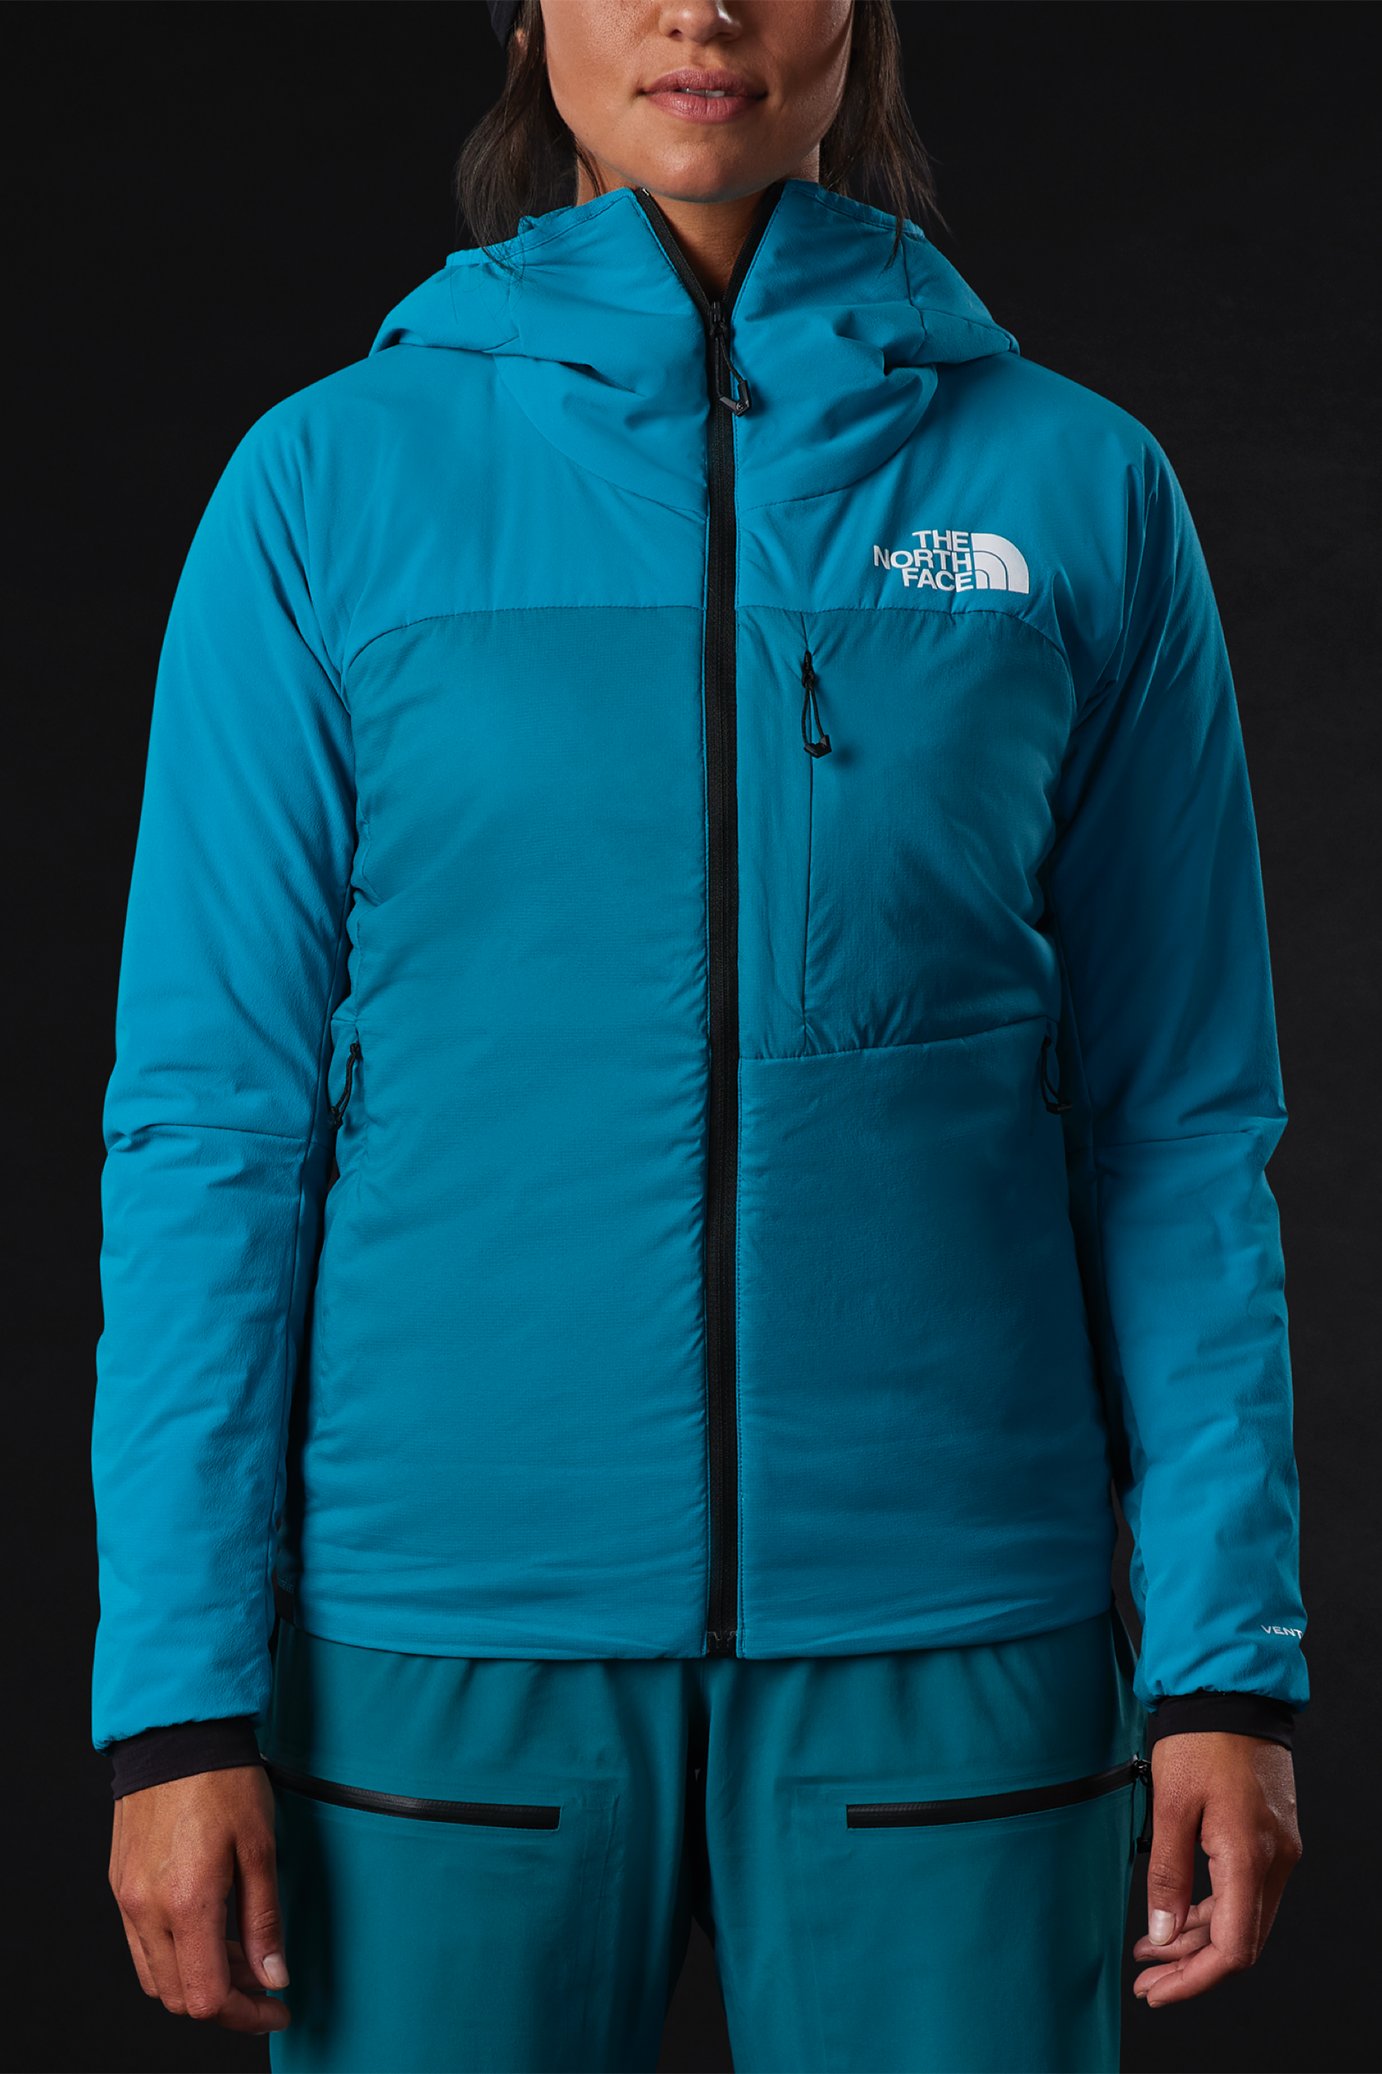 Studio shot of the Women’s VENTRIX™ Hoodie from The North Face.